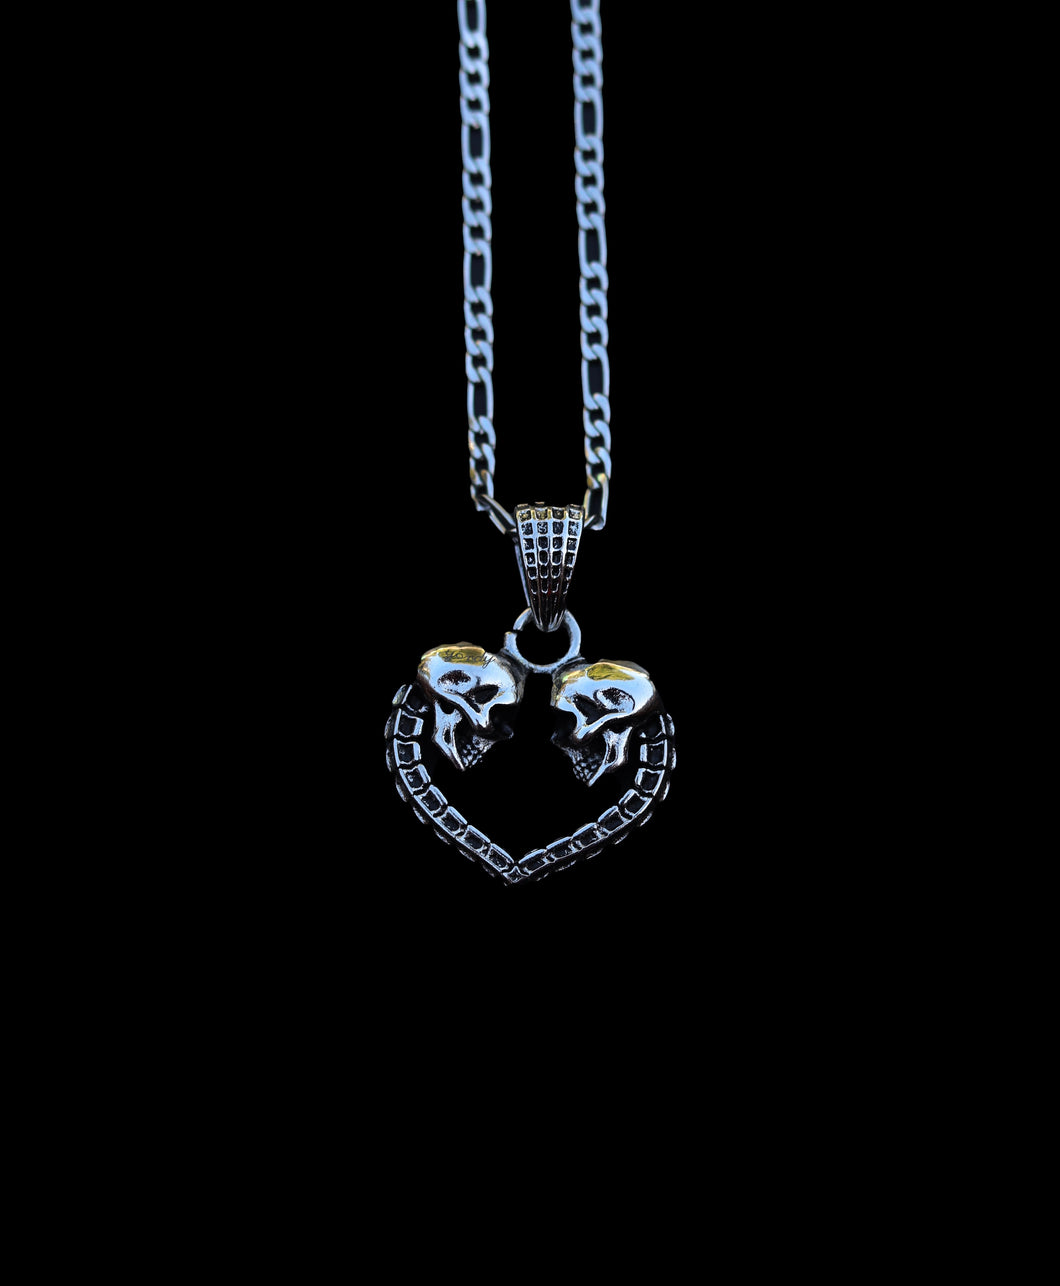 Silver Forbidden Love Necklace - Fashion Jewelry by Yordy.